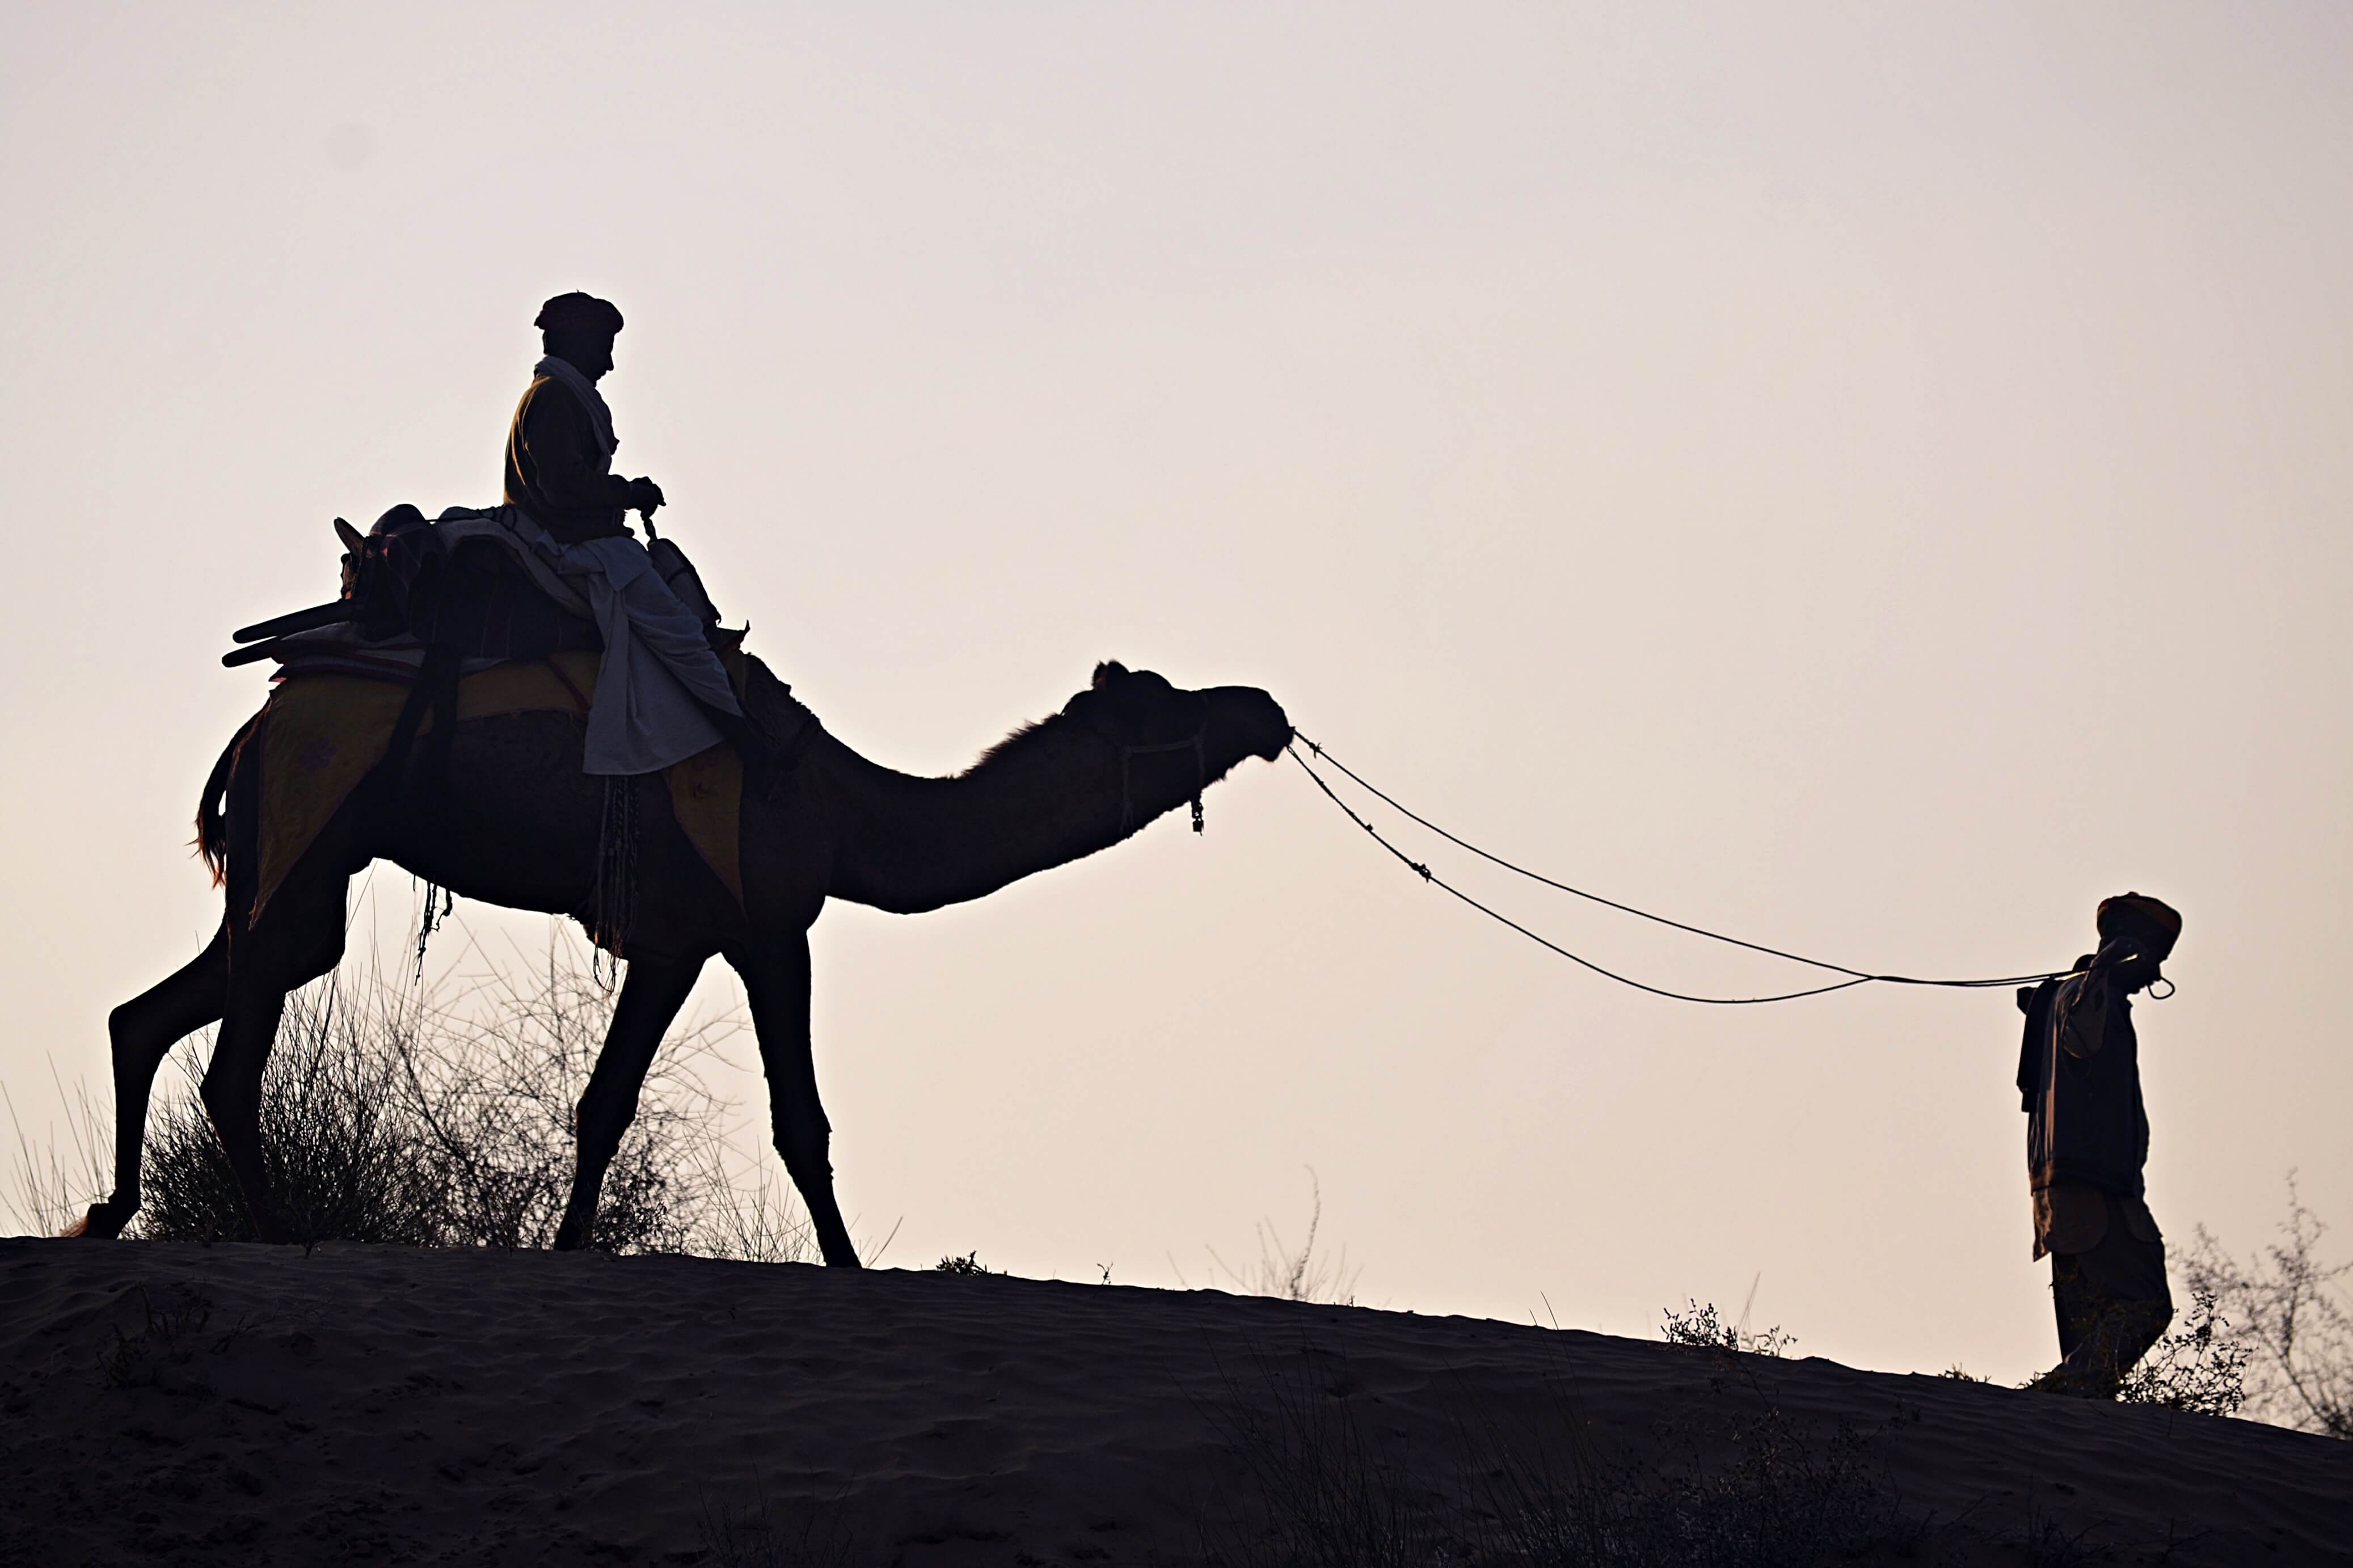 Camel in the Thar desert in Rajasthan, India